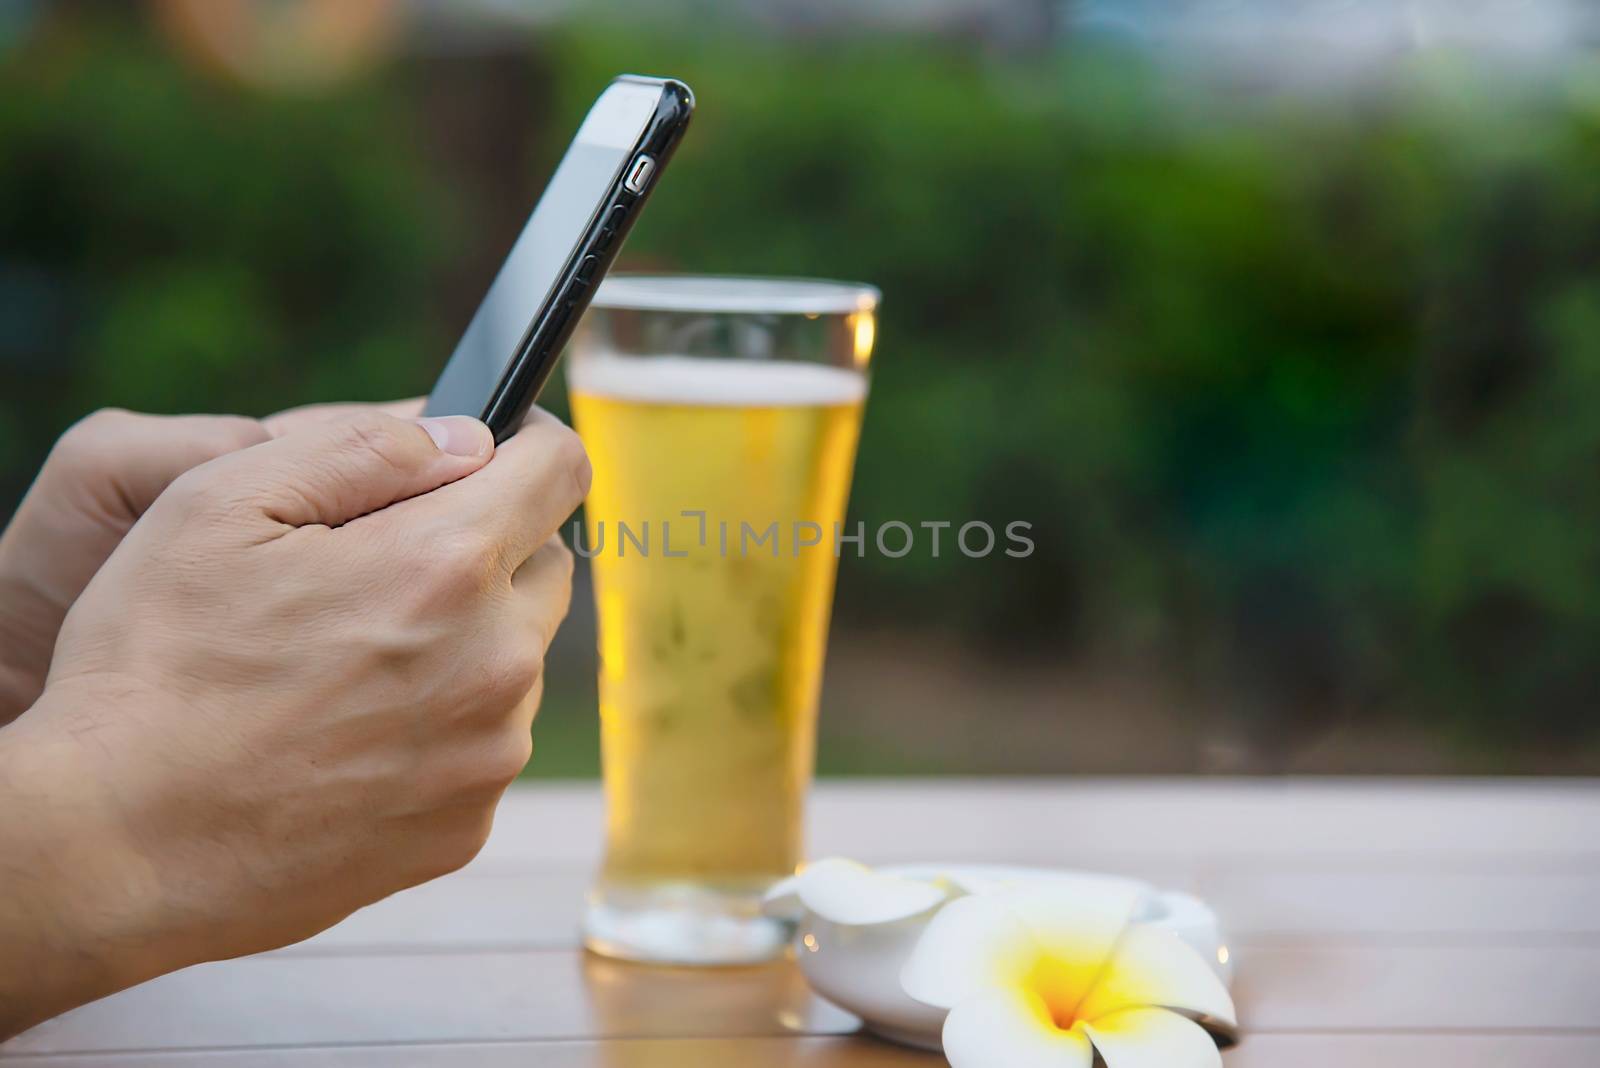 Man using mobile during happy time relax in restaurant with softdrink and green garden background - people relax with technology lifestyle concept by pairhandmade